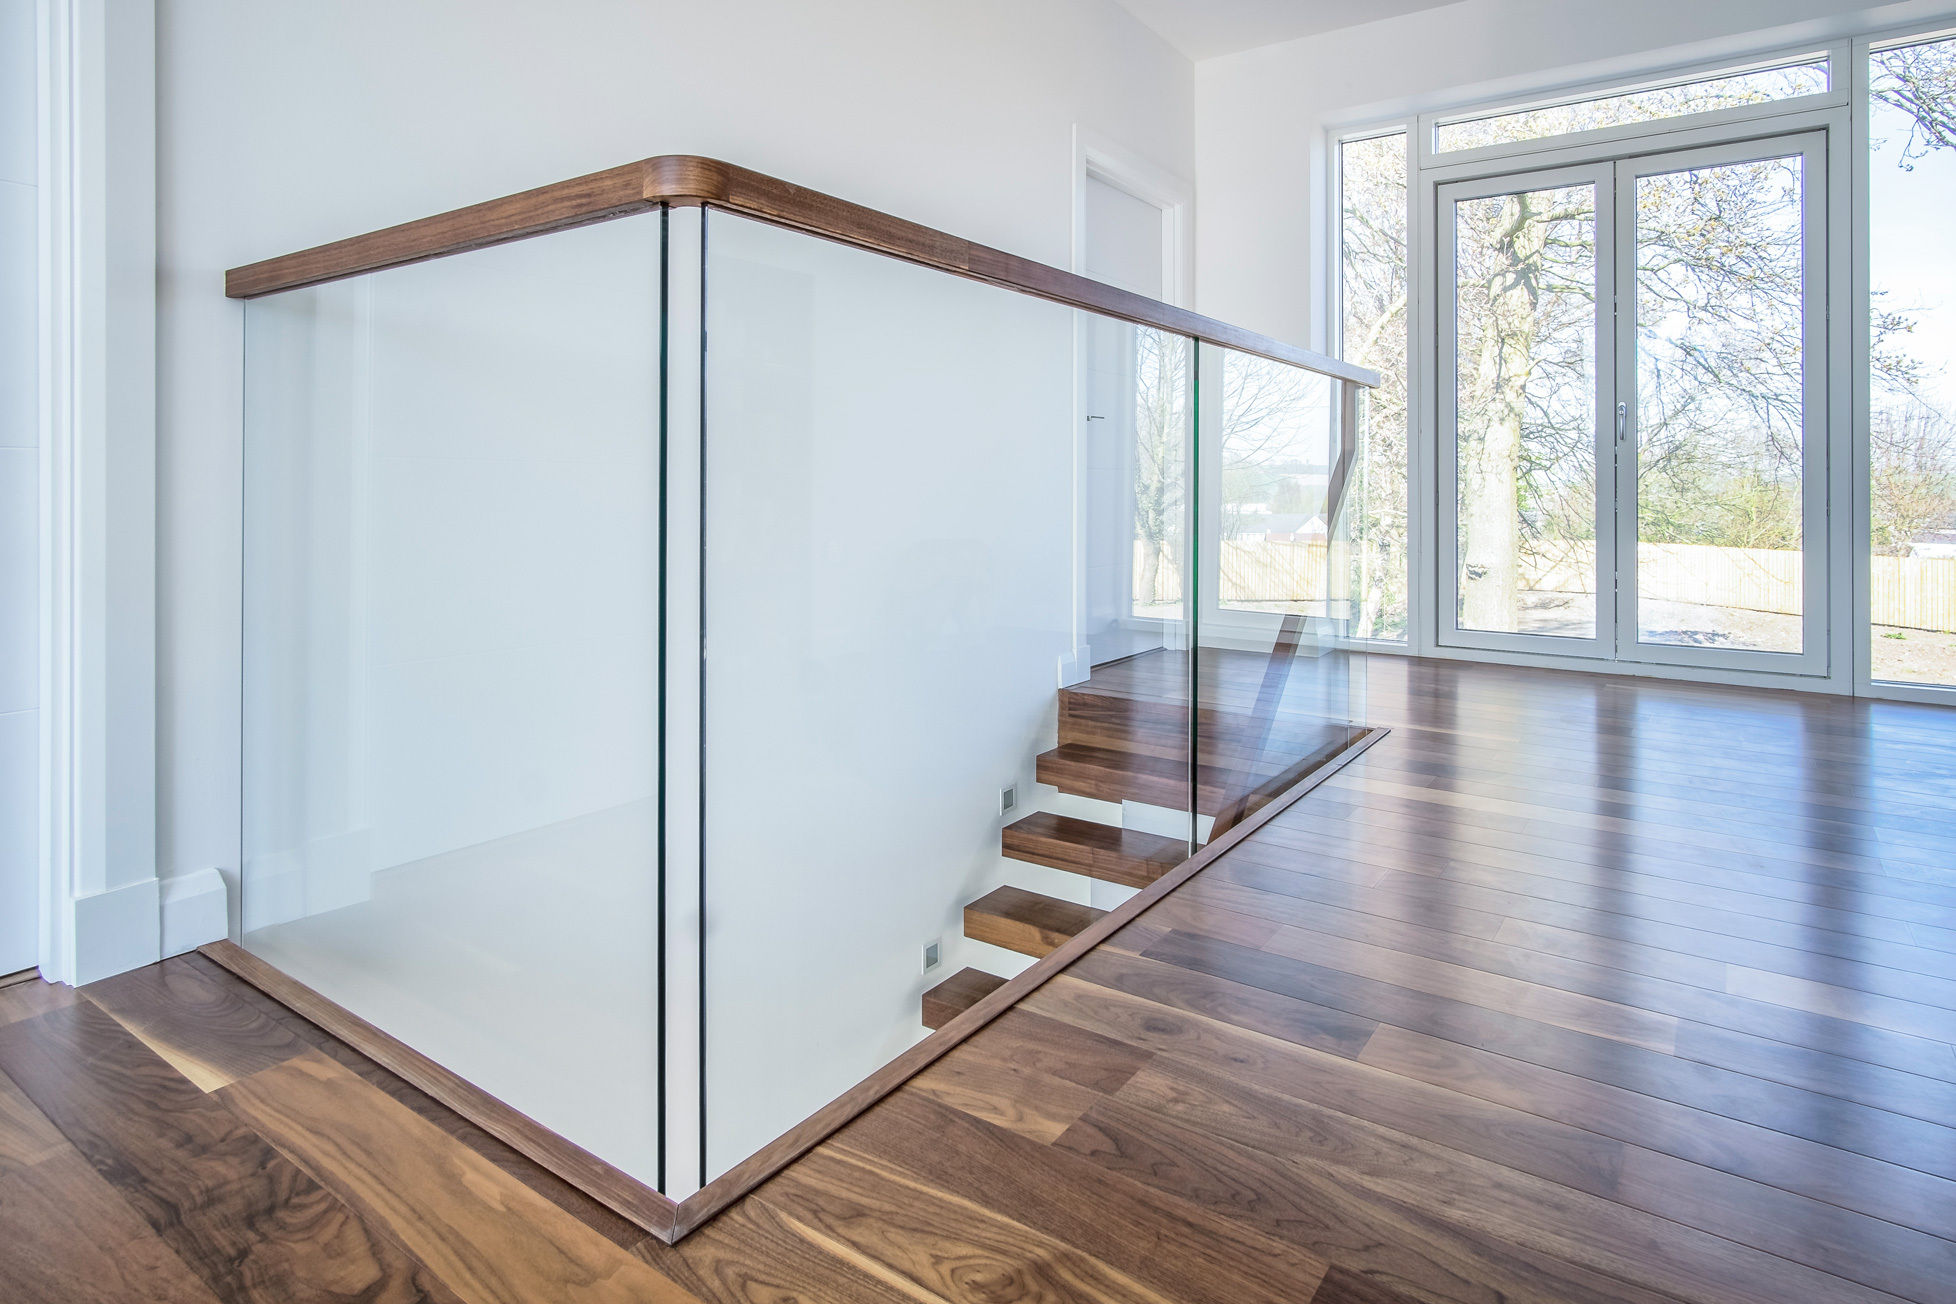 Contemporary glass balustrade of walnut staircase with walnut handrail.